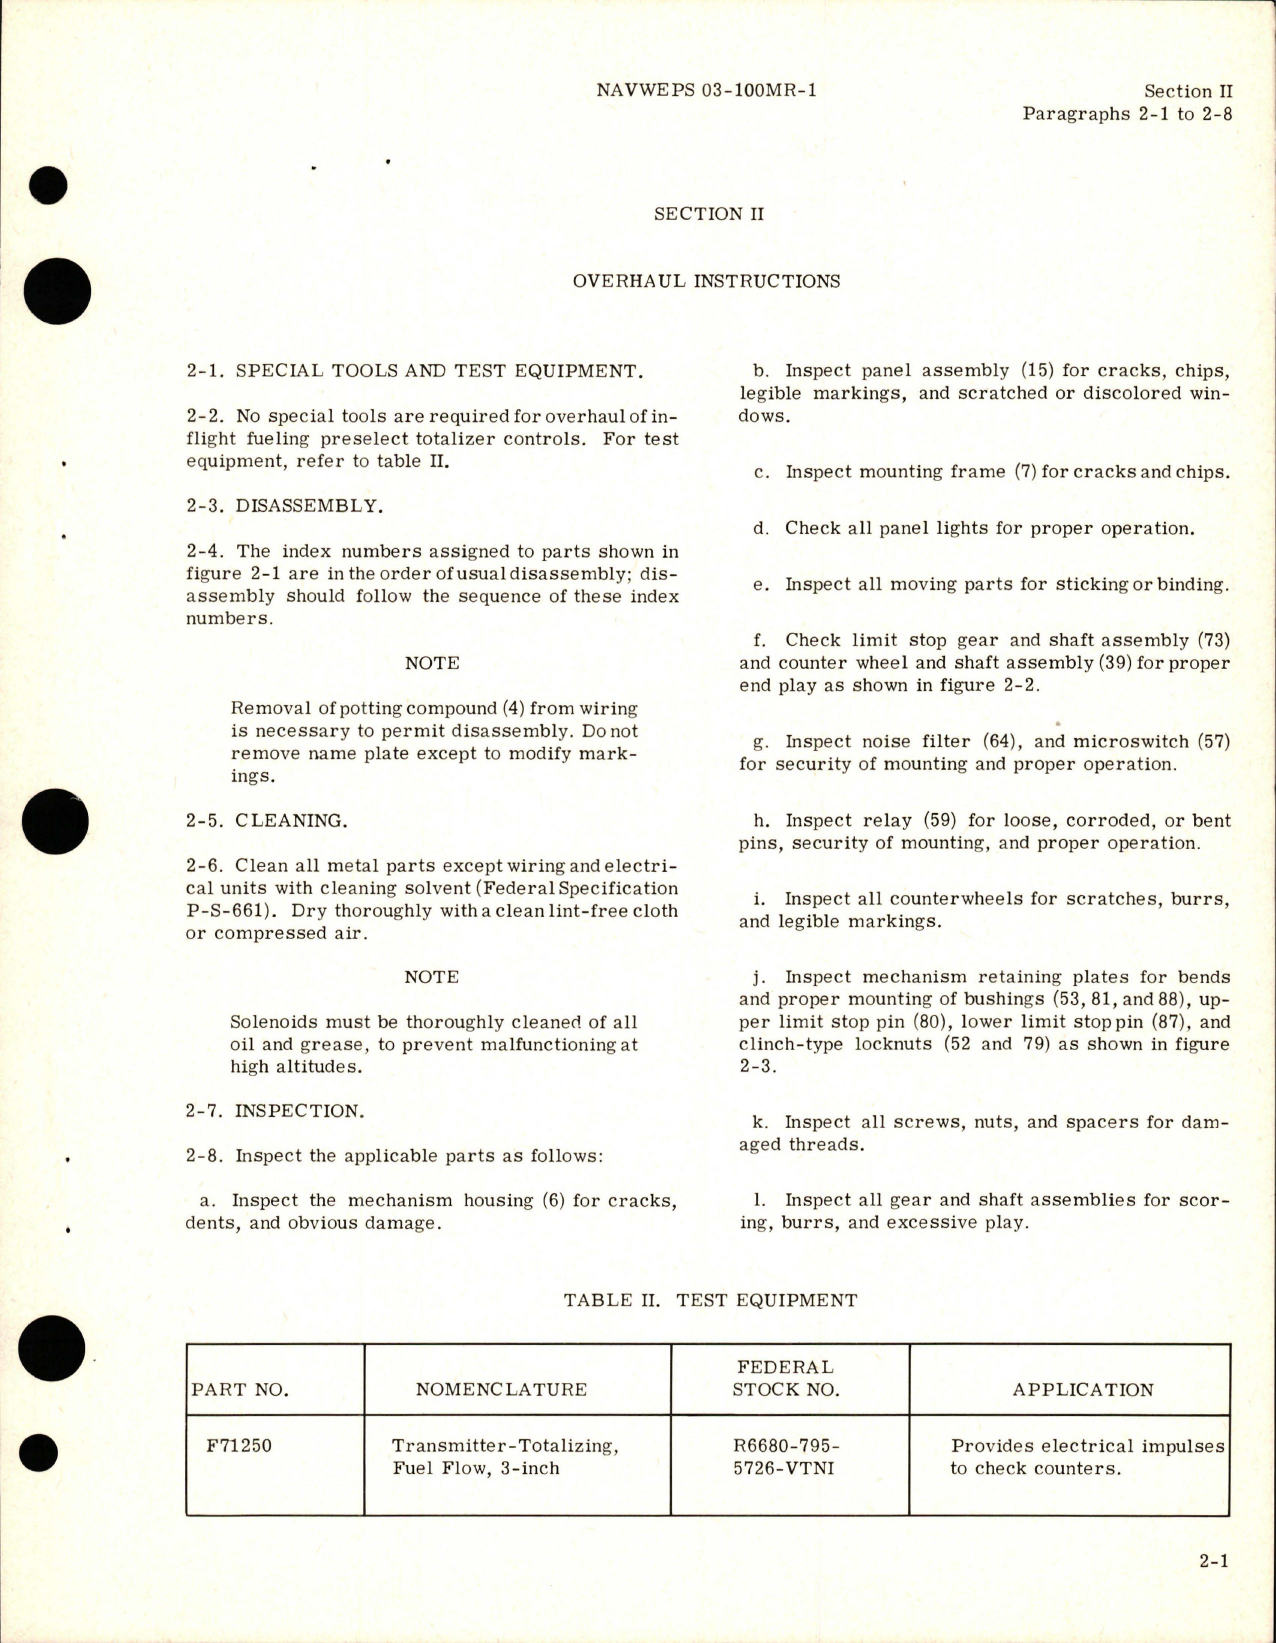 Sample page 5 from AirCorps Library document: Overhaul Instructions for In-Flight Fueling Preselect Totalizer Control - Part F71780